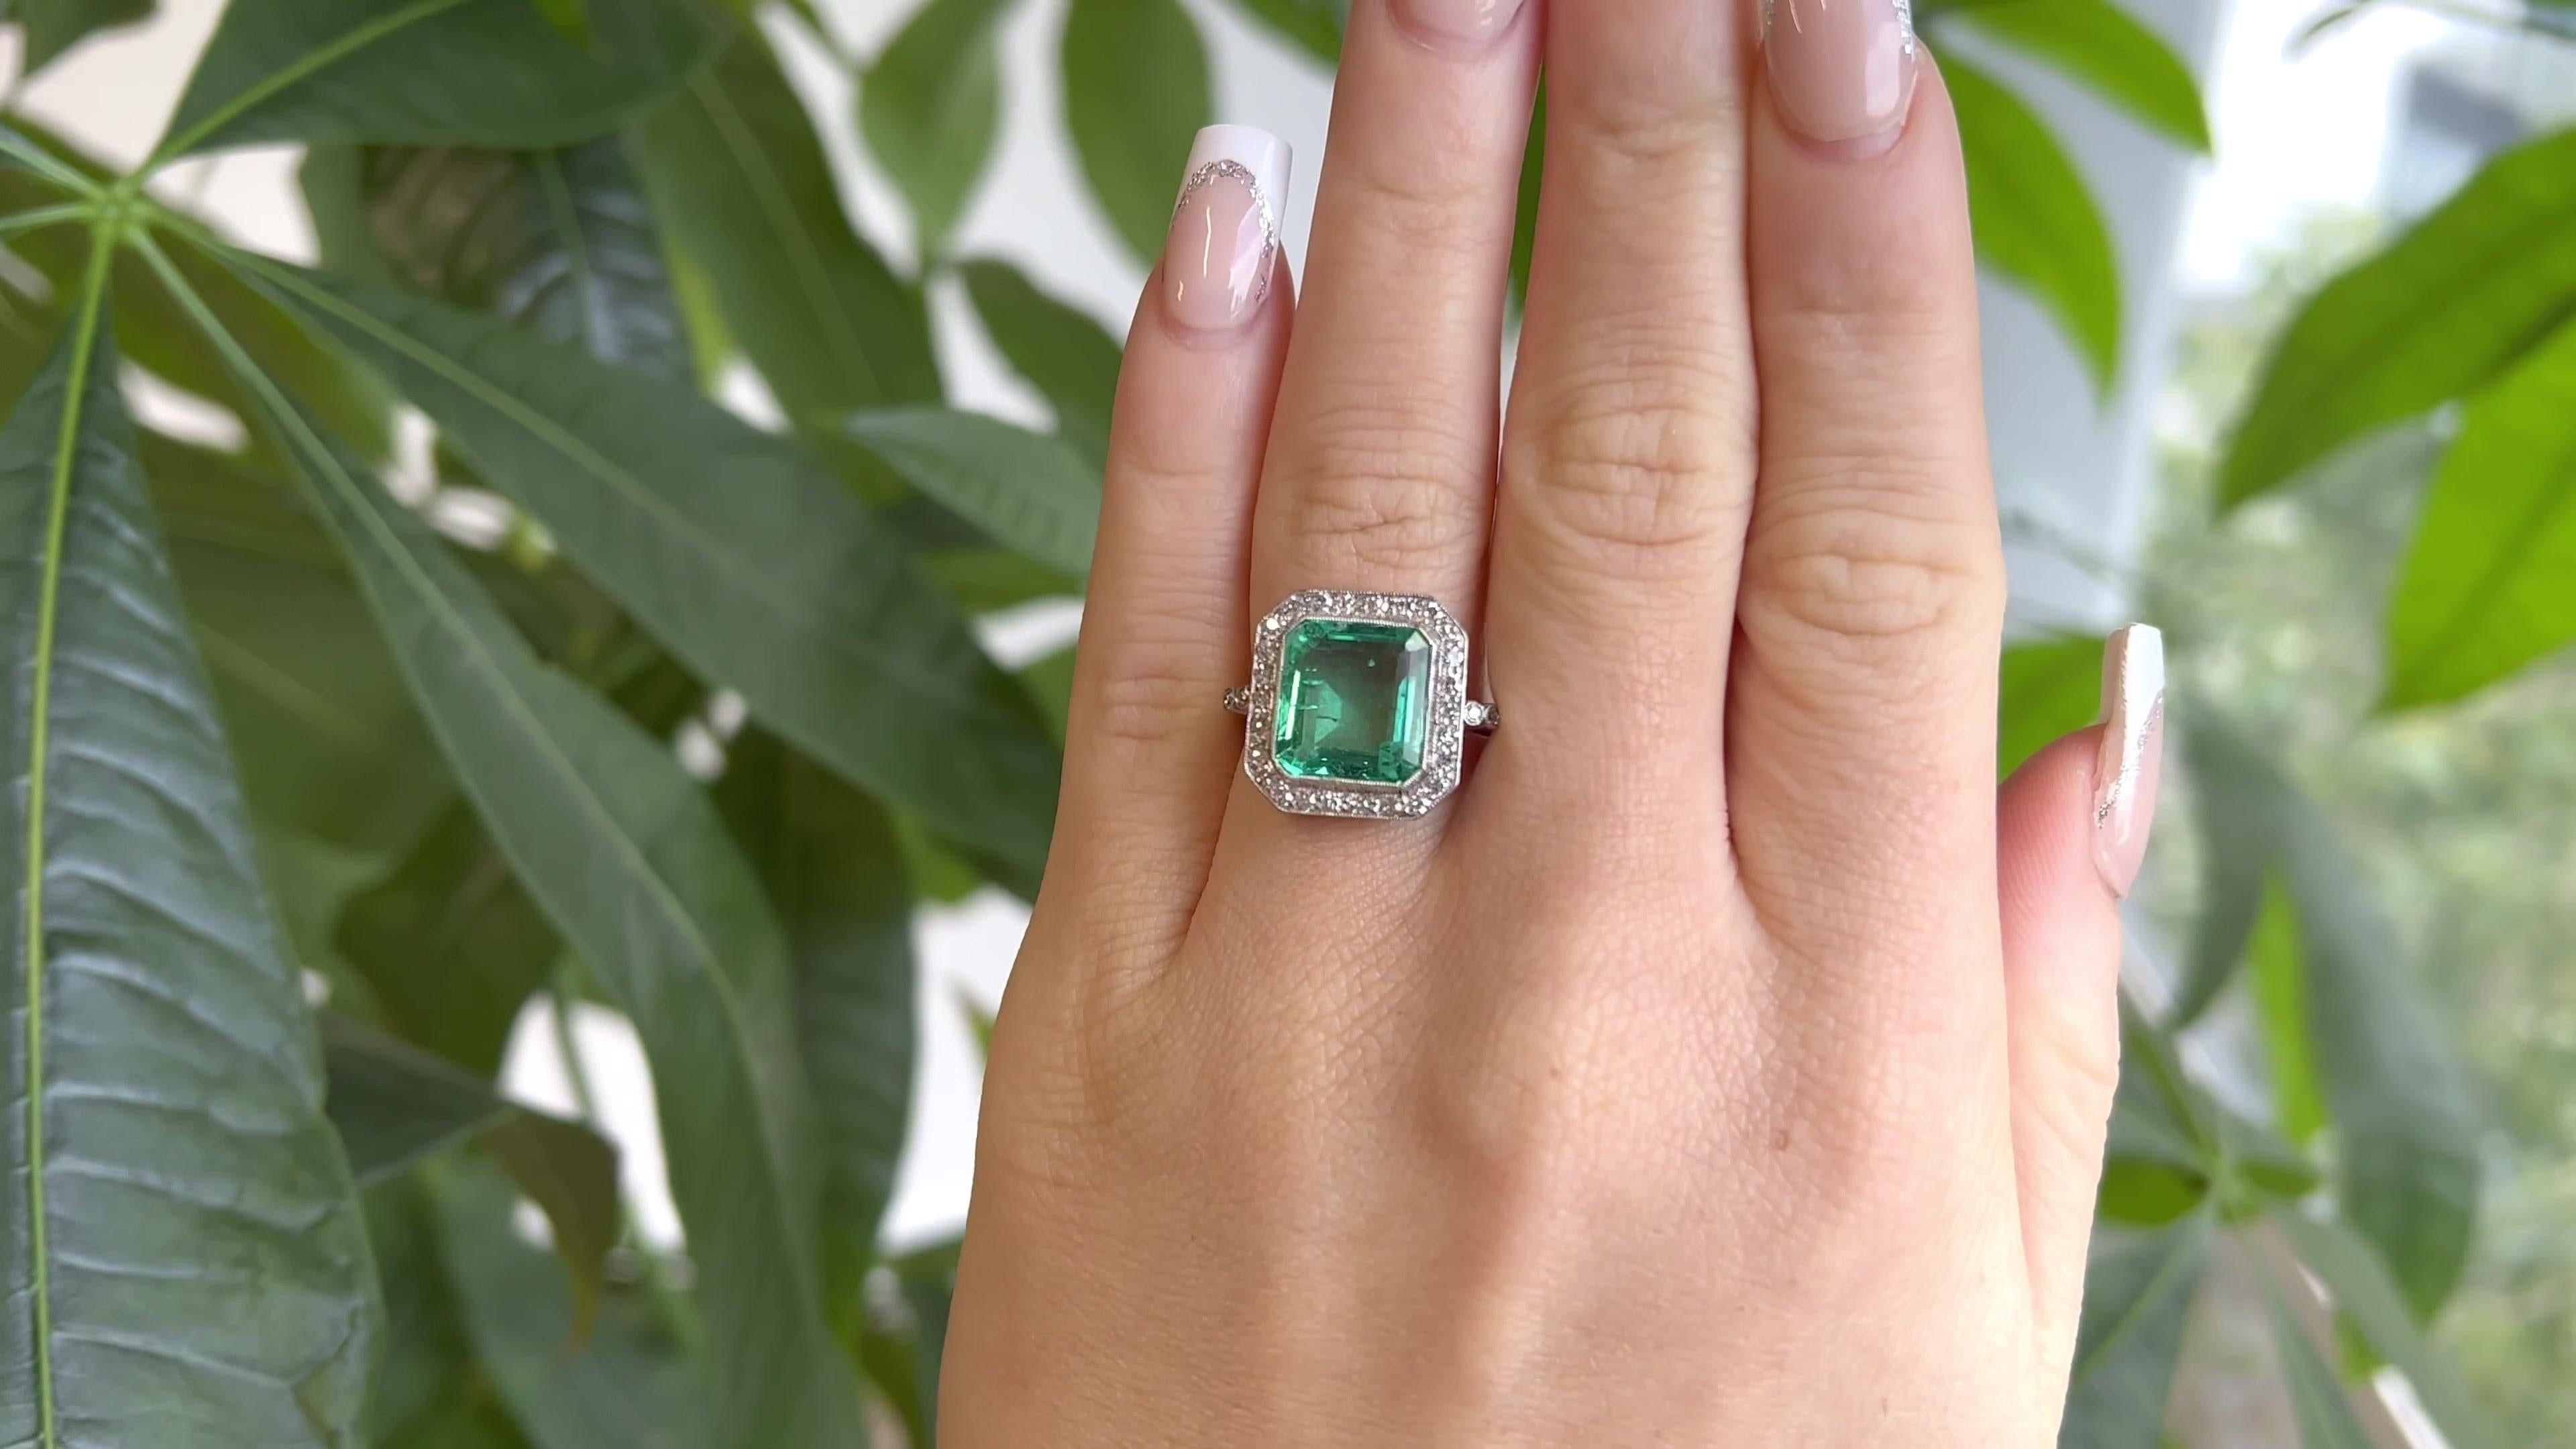 One Art Deco GIA Colombian 5.00 Carats No Oil  Emerald Diamond Platinum Ring. Featuring one GIA certified octagonal step cut emerald of approximately 5.00 carats, accompanied with certificate #2221379973 stating the emerald is of Colombian origin